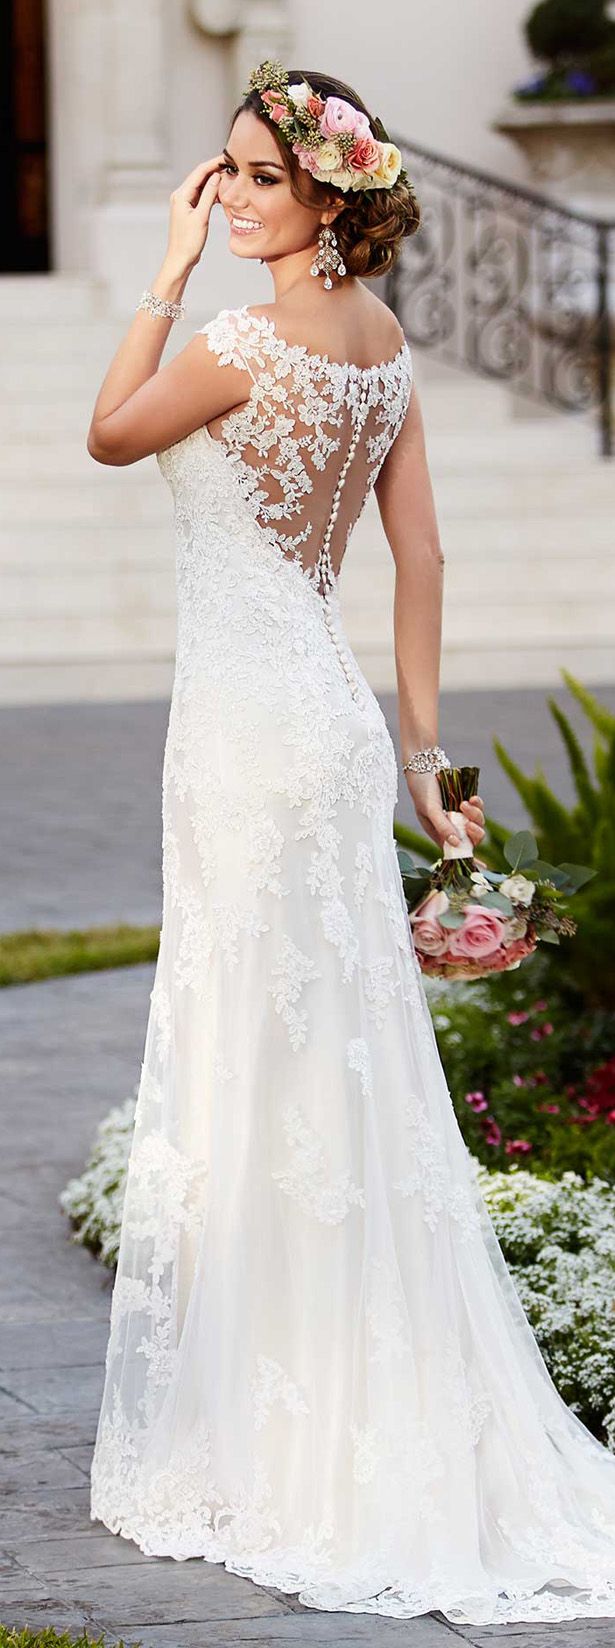 Latest Western Wedding Dresses & Gowns Collection 2015-2016 (17)